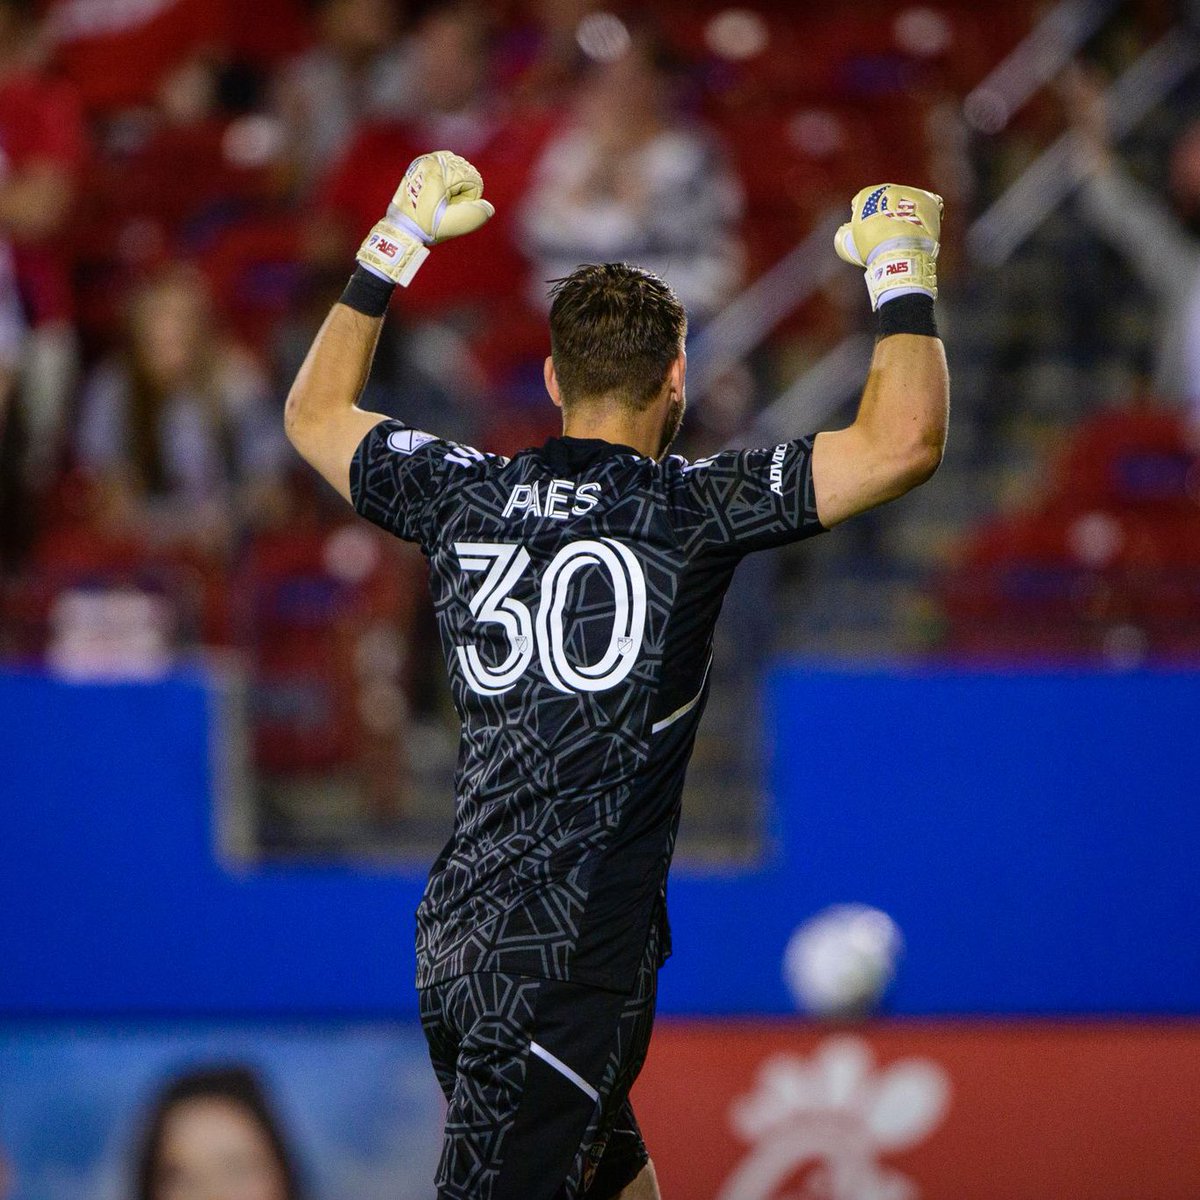 📌 Playoff clinched! 🛫 @FCDallas and Maarten Paes book their ticket to the 2022 Audi MLS Cup Playoffs. Vamos!